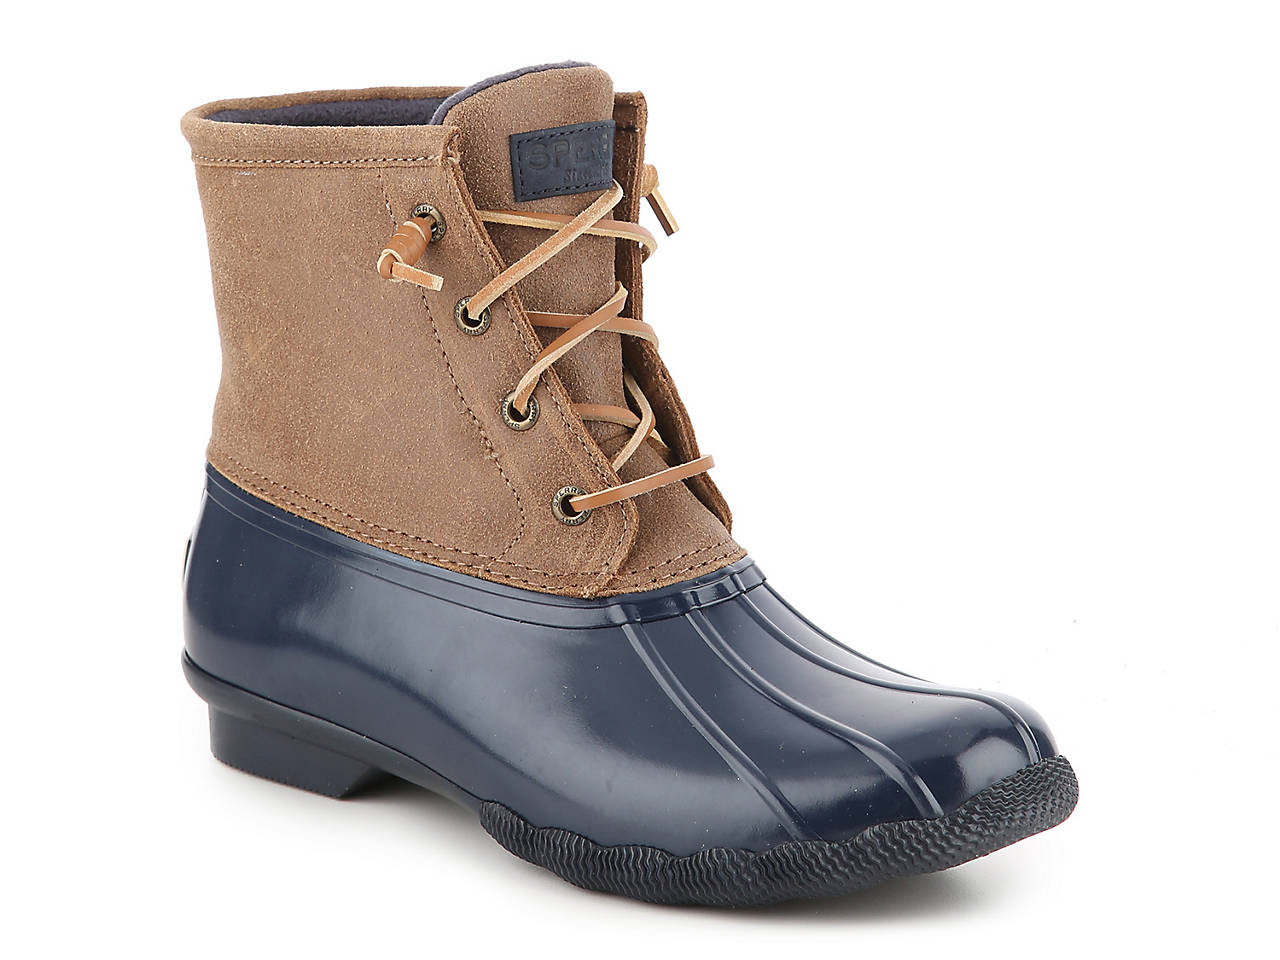 Sperry Top-Sider Sweetwater Duck Boot Women's Shoes | DSW